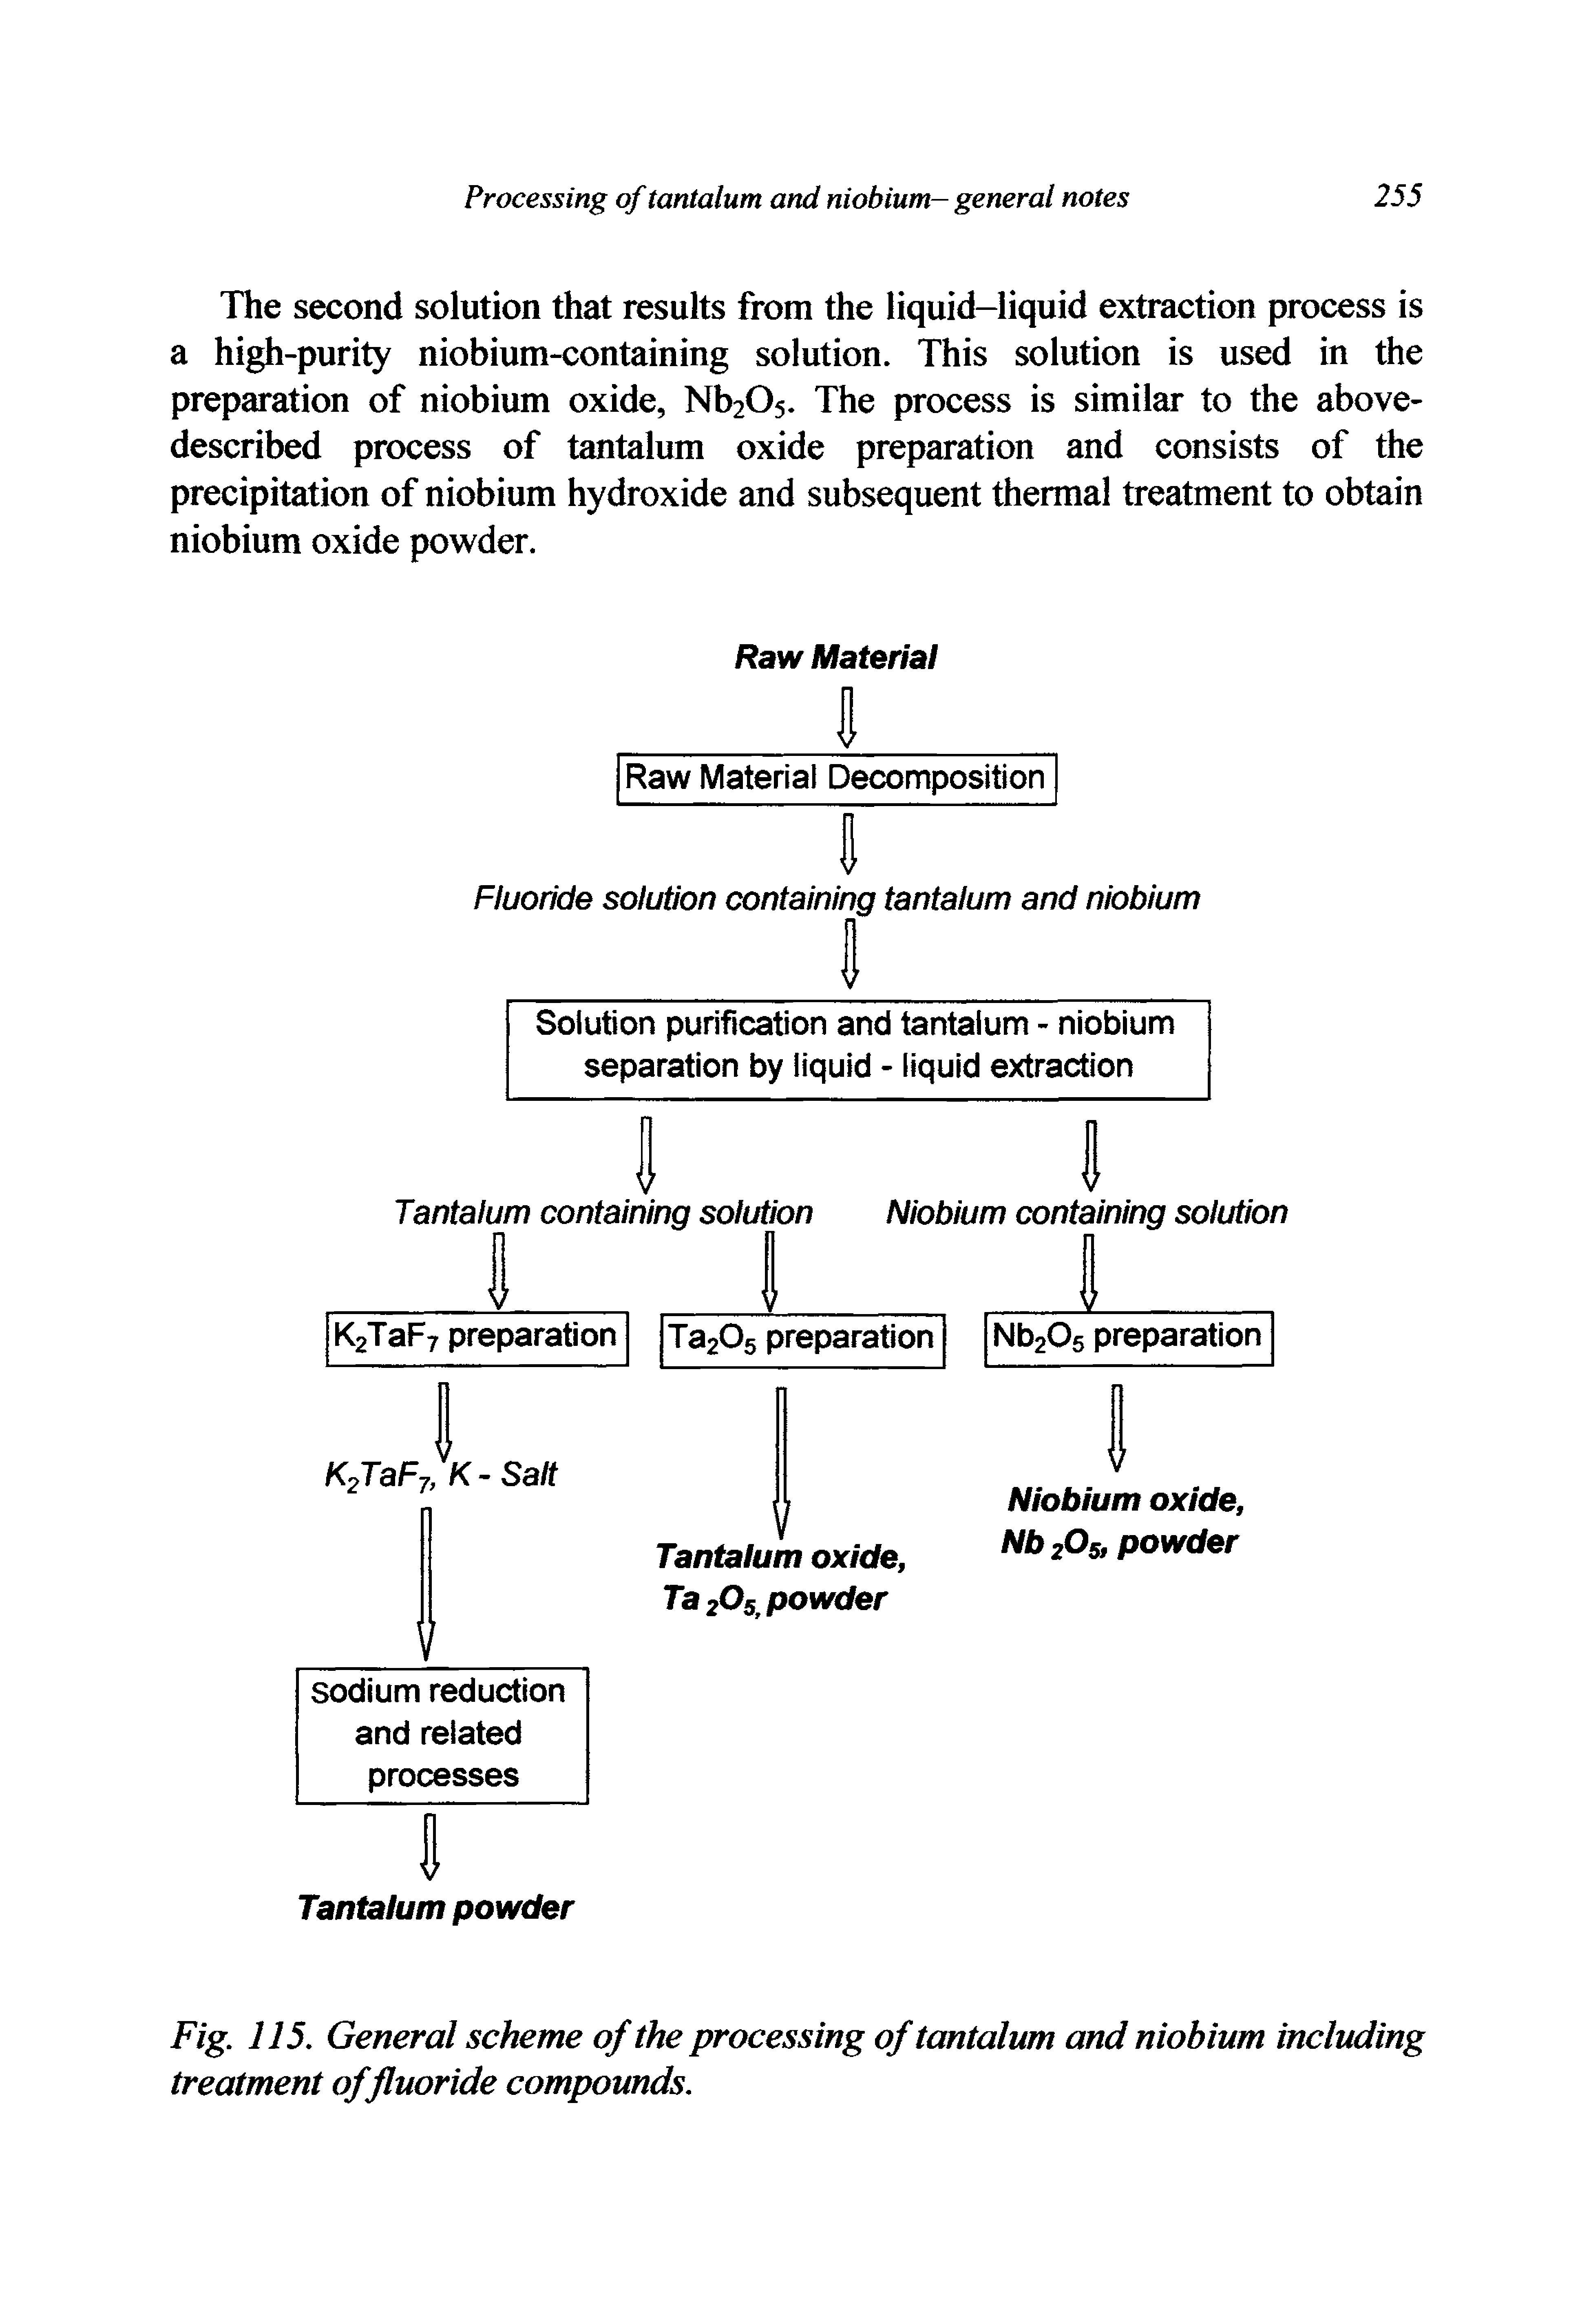 Fig. 115. General scheme of the processing of tantalum and niobium including treatment of fluoride compounds.